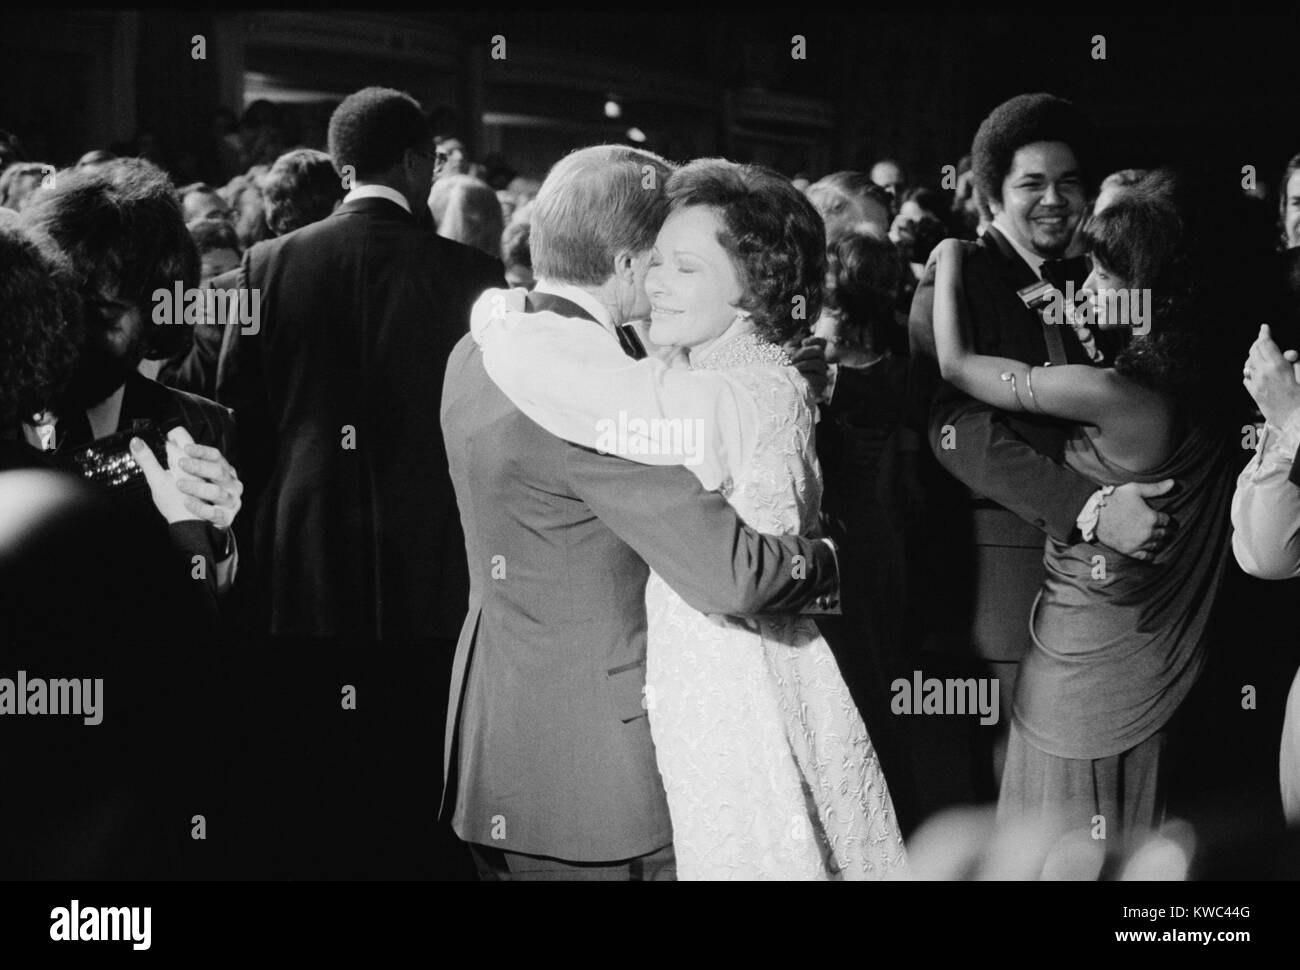 President Jimmy Carter and First Lady Rosalynn Carter dancing at an inaugural ball. Jan. 20, 1977. (BSLOC 2015 14 70) Stock Photo